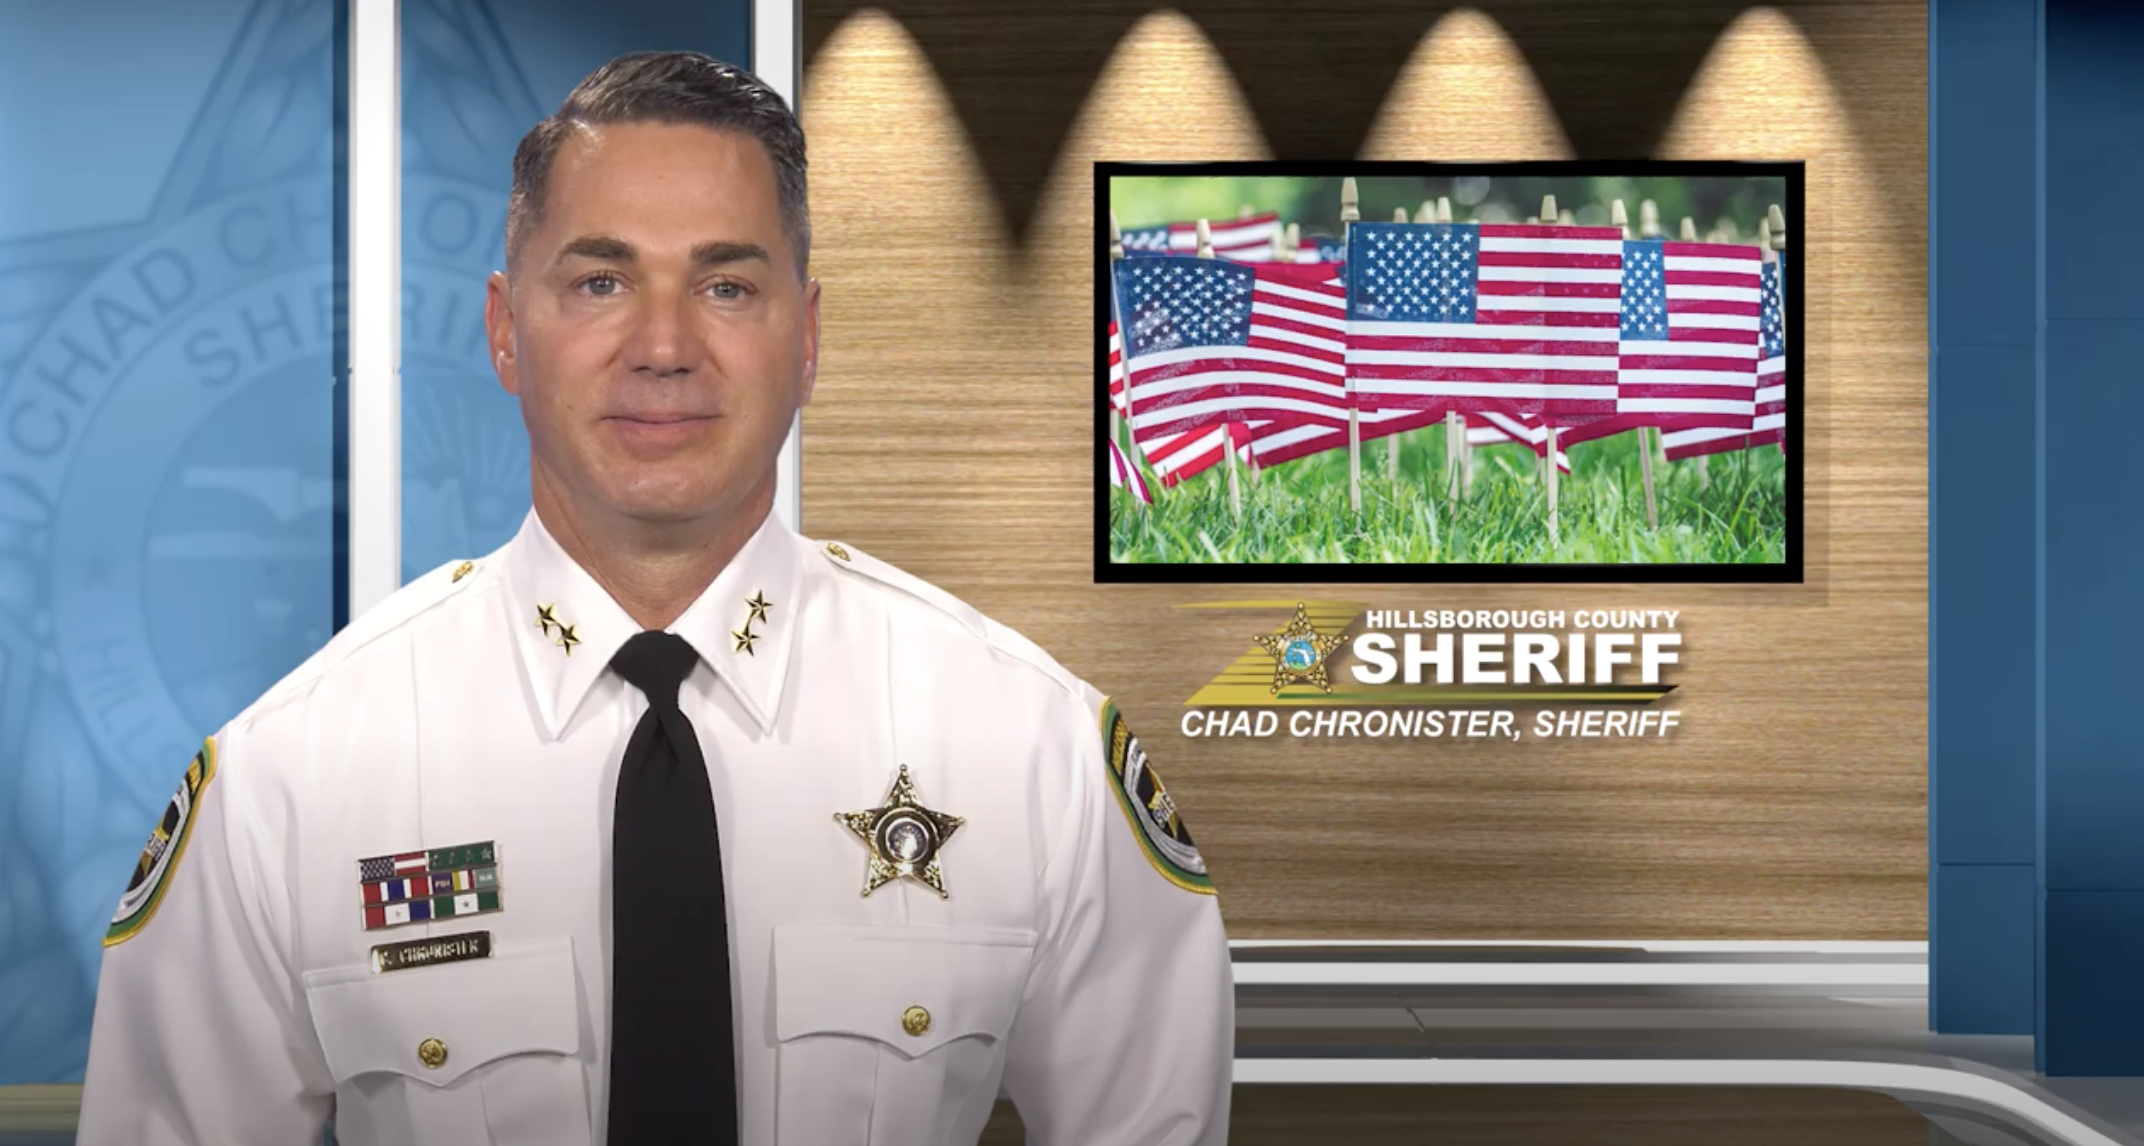 Sheriff Chad Chronister: Enjoy Memorial Day, but do it responsibly